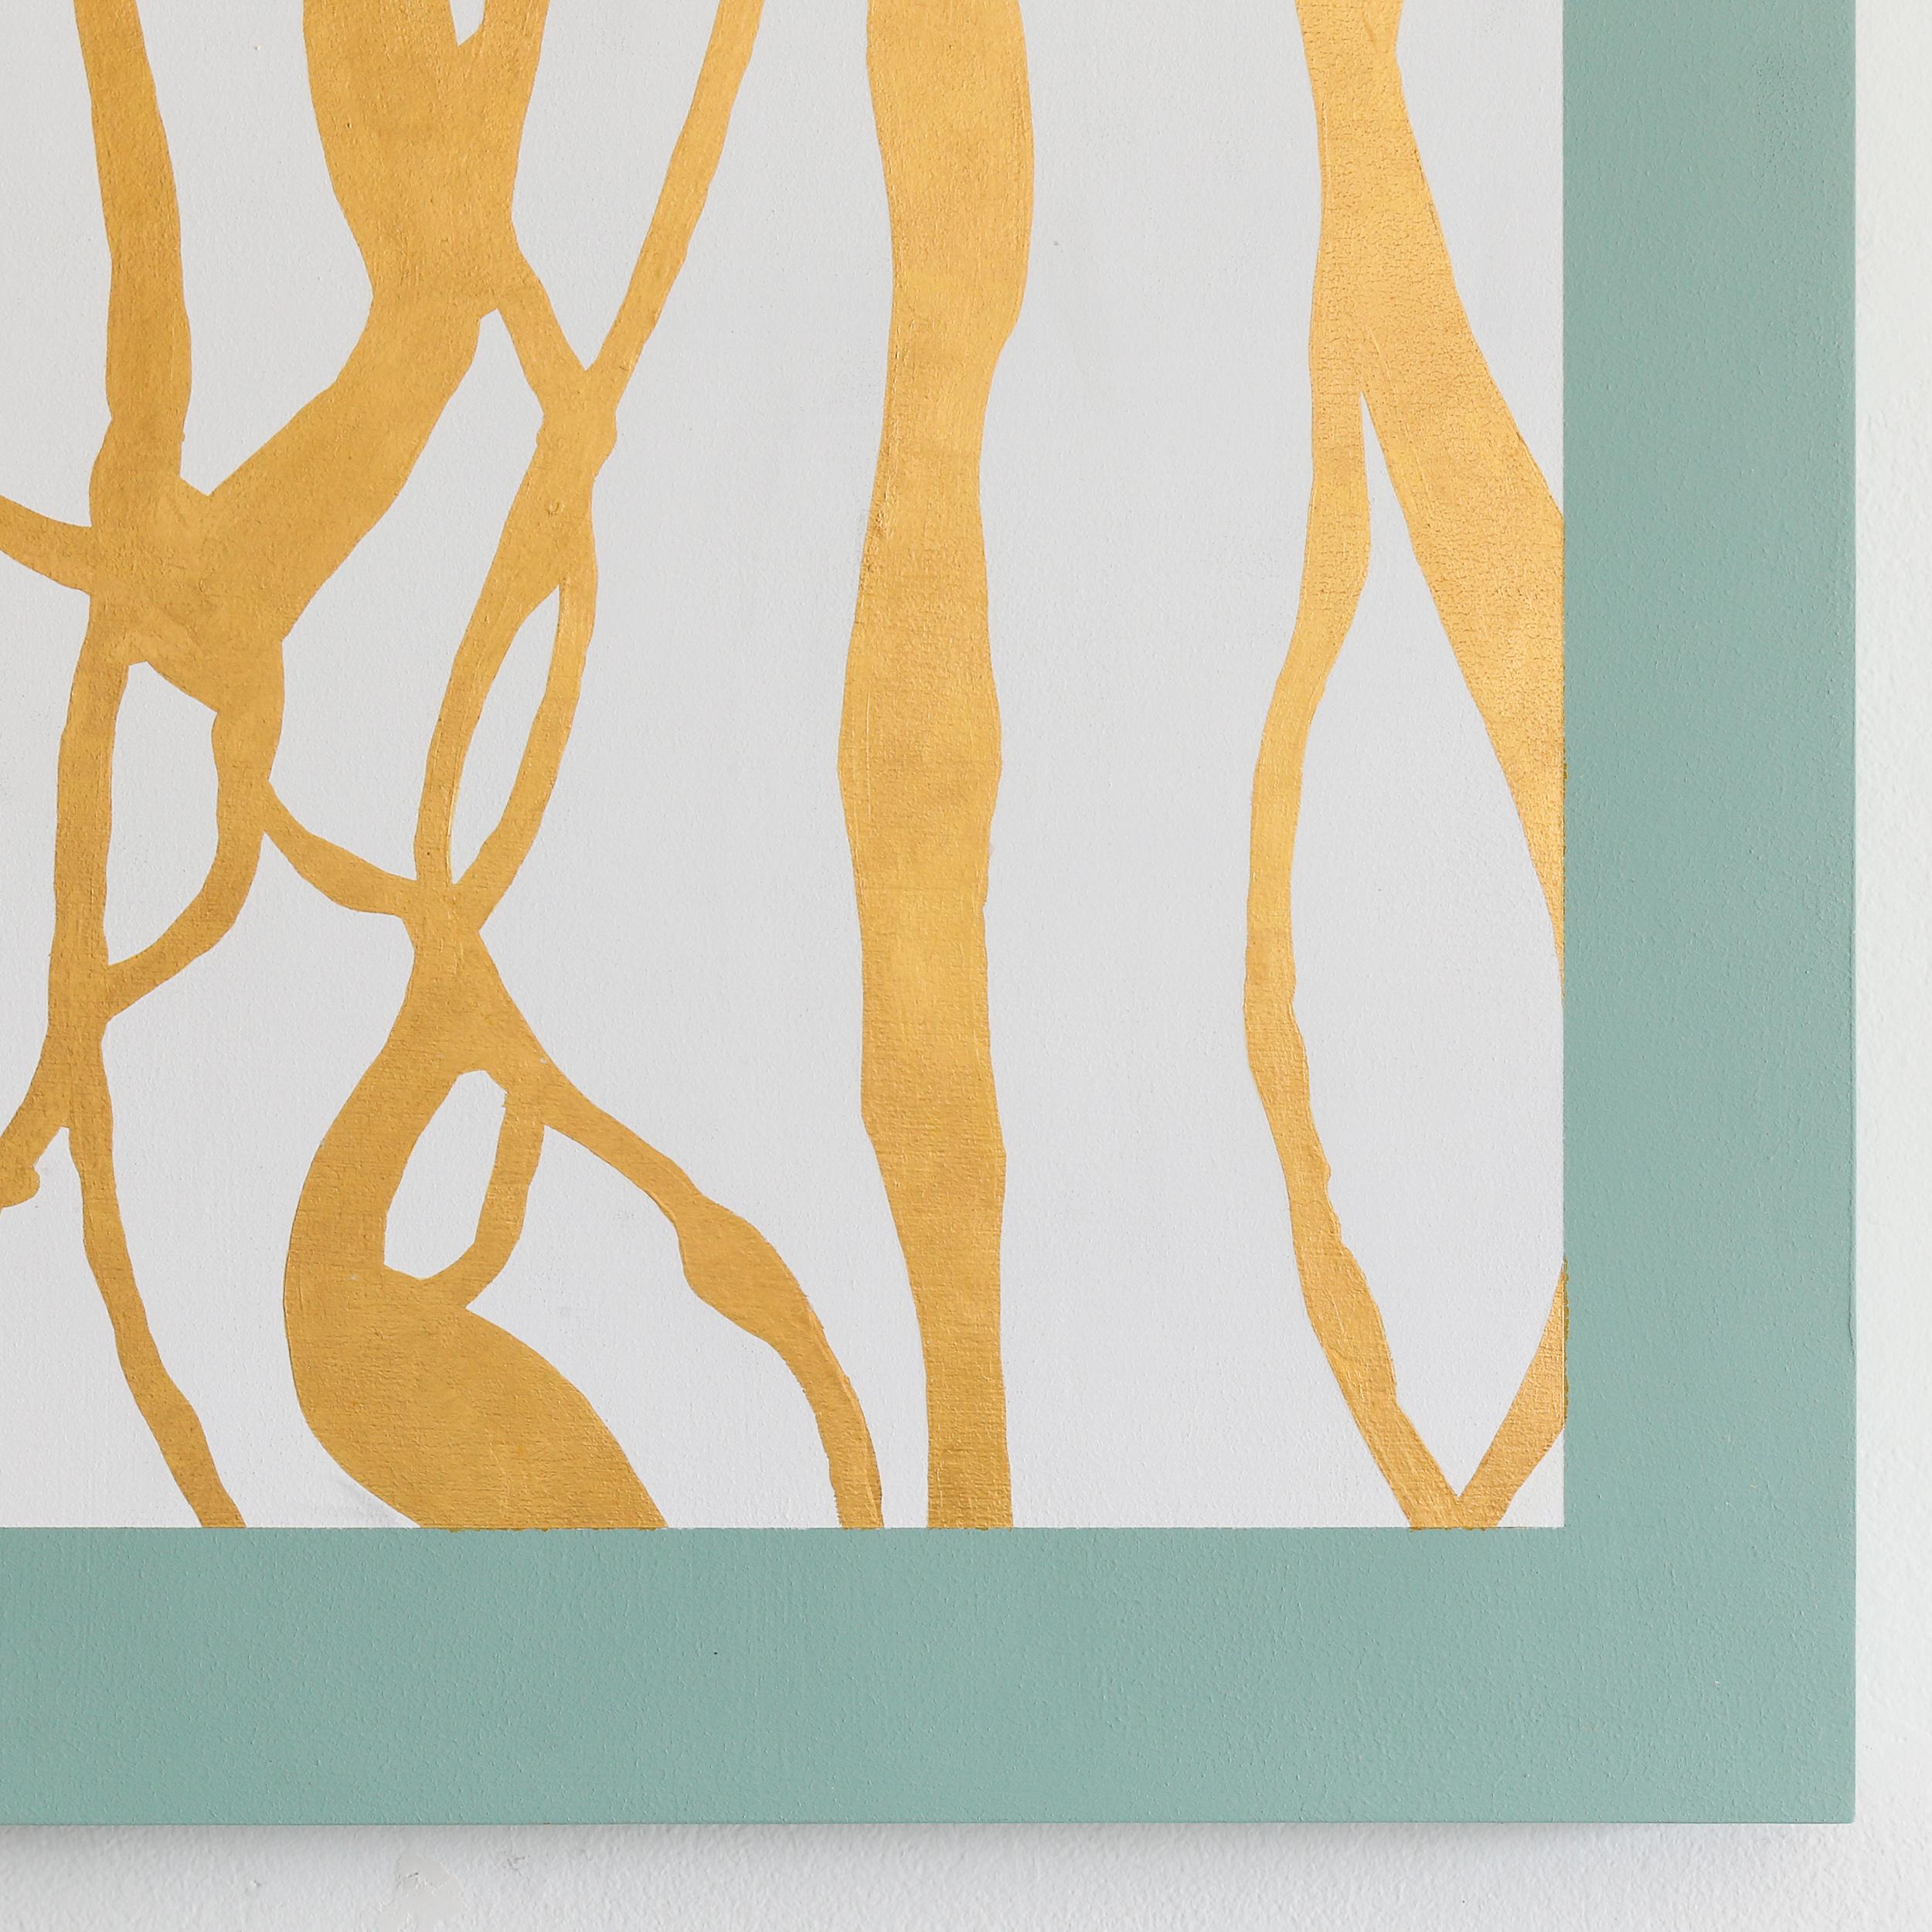 JESSICA FELDHEIM
This minimalist modern artwork uses gold leaf, white and soft green tones. 
Covington Blue With Pure 24k Gold Leaf 
Mixed media on Panel
30.00w x 30.00h x 1.50d in
$3,800.00